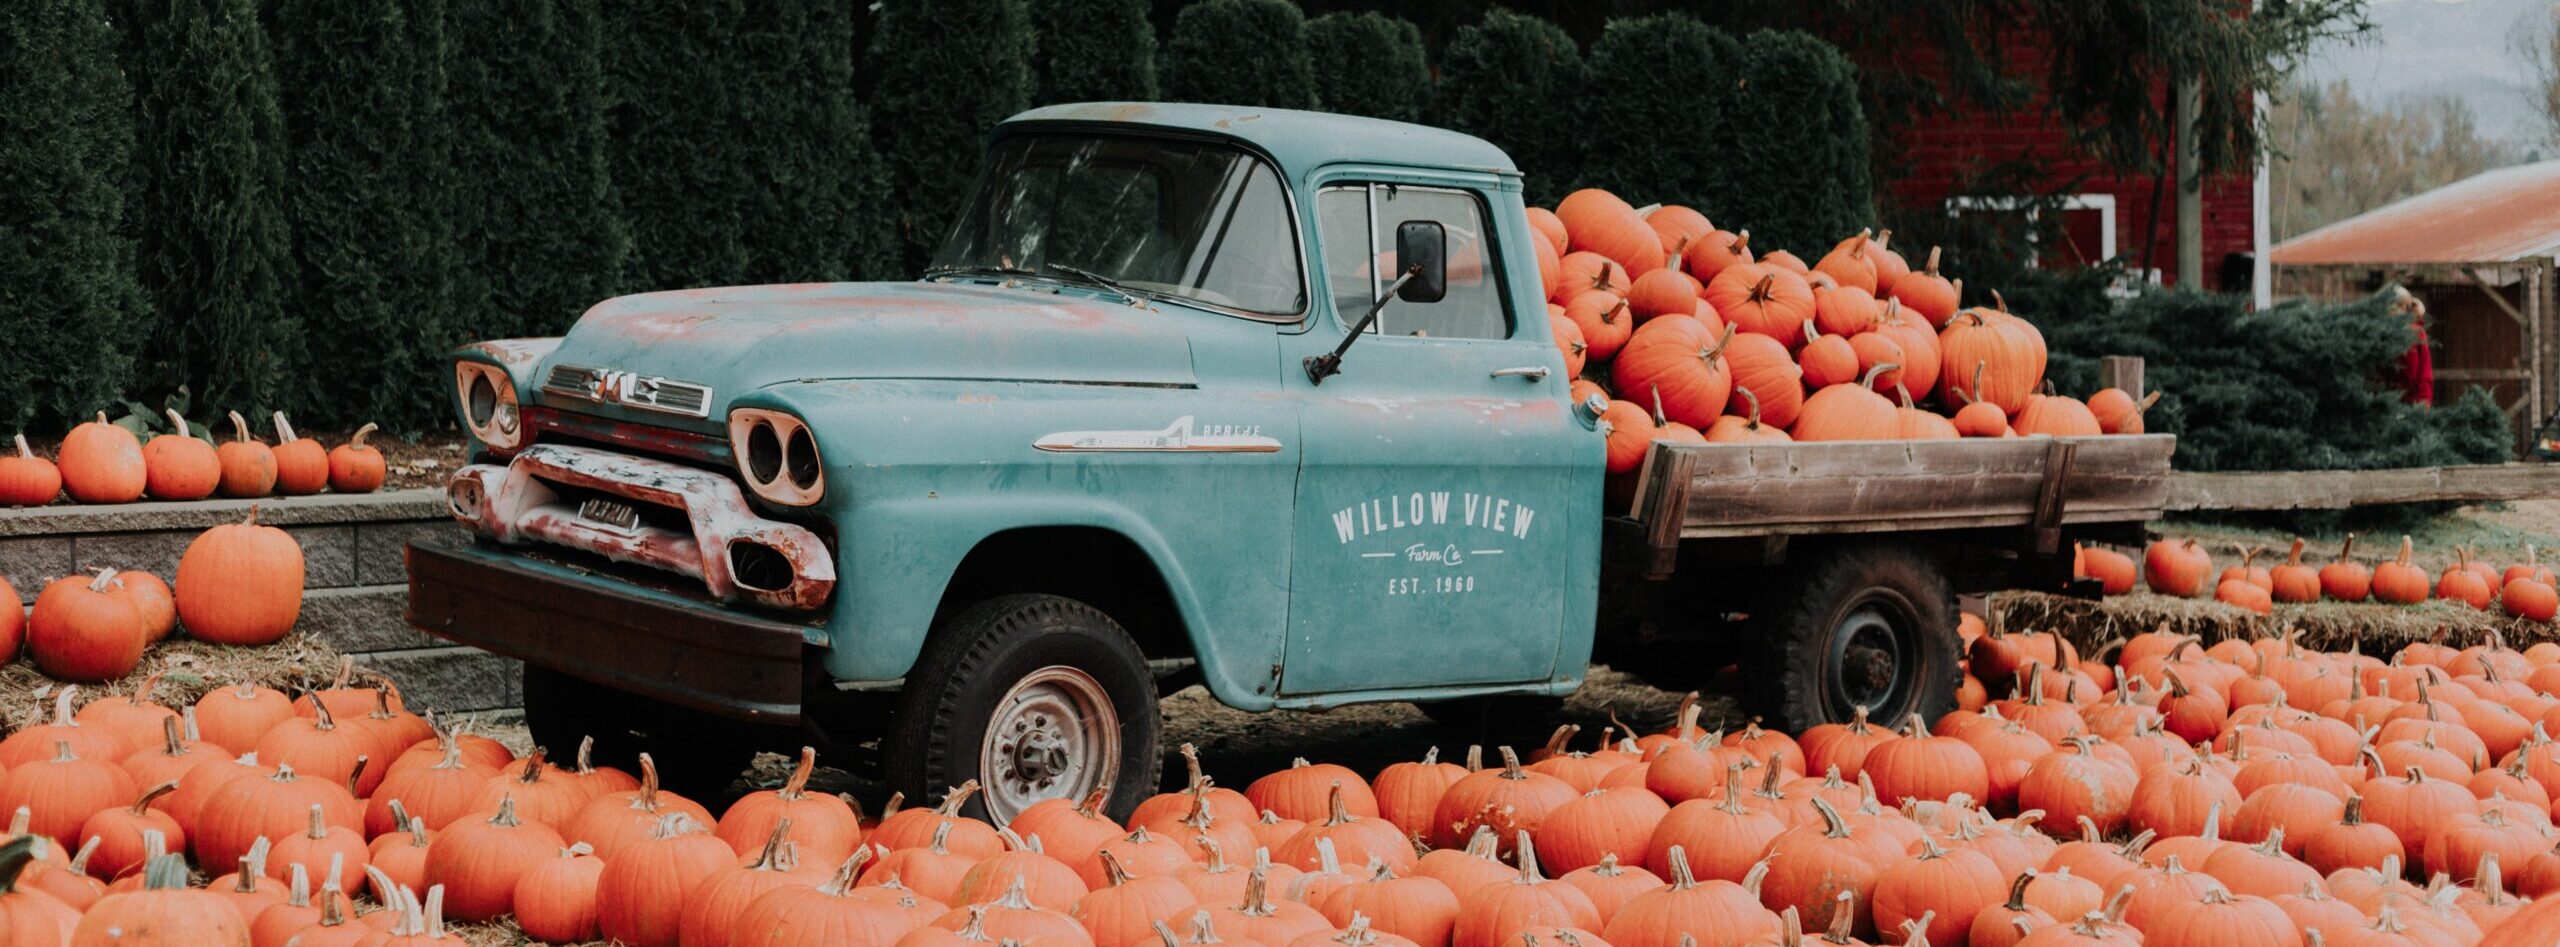 An old fashioned truck piled high with pumpkins sits in the middle of a pumpkin patch.